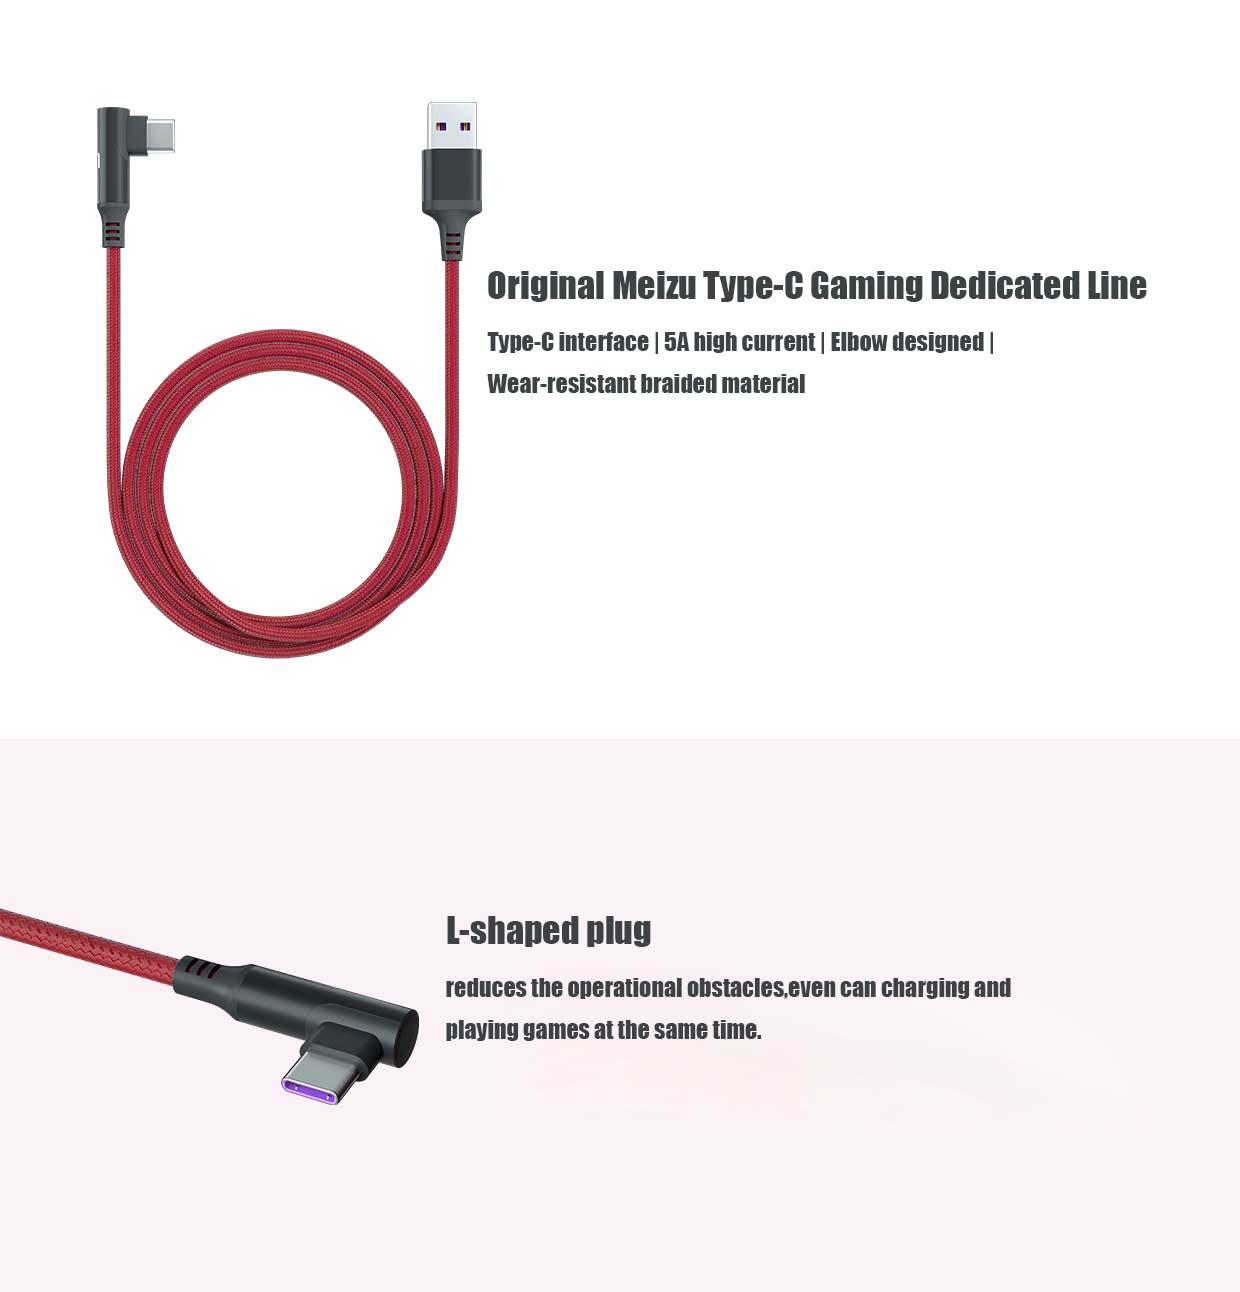 Meizu Type-C cable